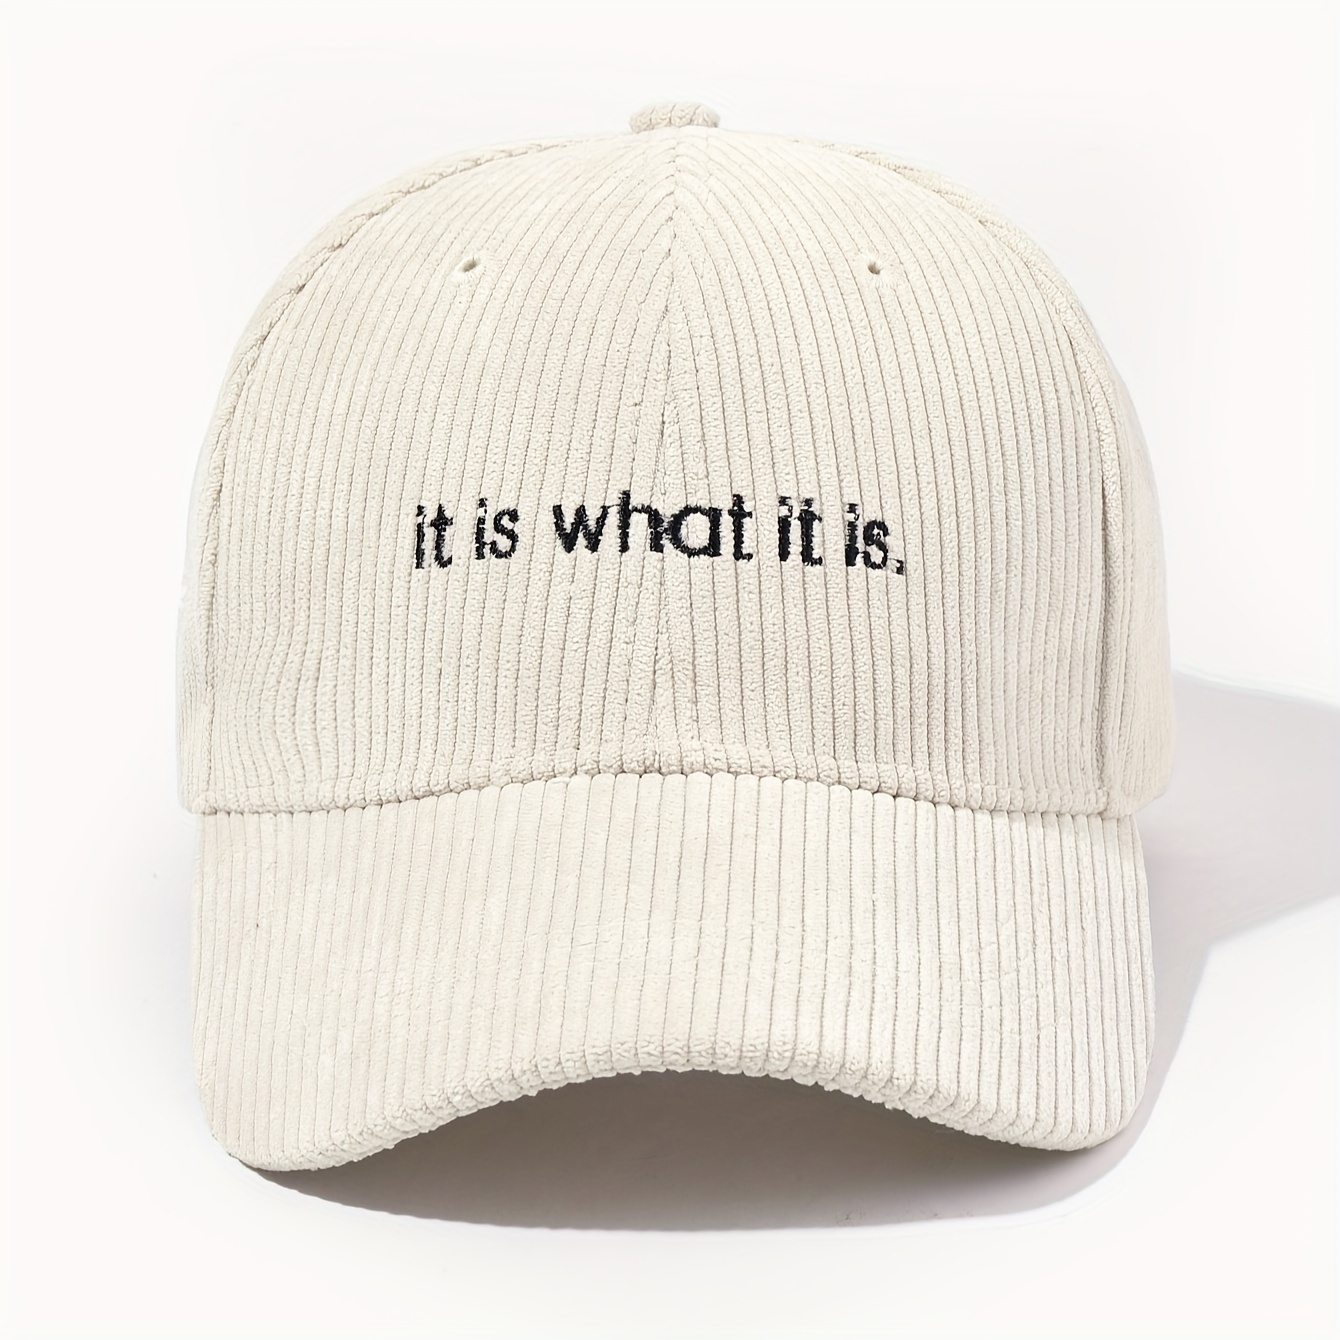 

It Is What It Is Embroidery Baseball Cap Classic Slogan Beige Casual Corduroy Sports Hat Lightweight Adjustable Dad Hats For Women Men